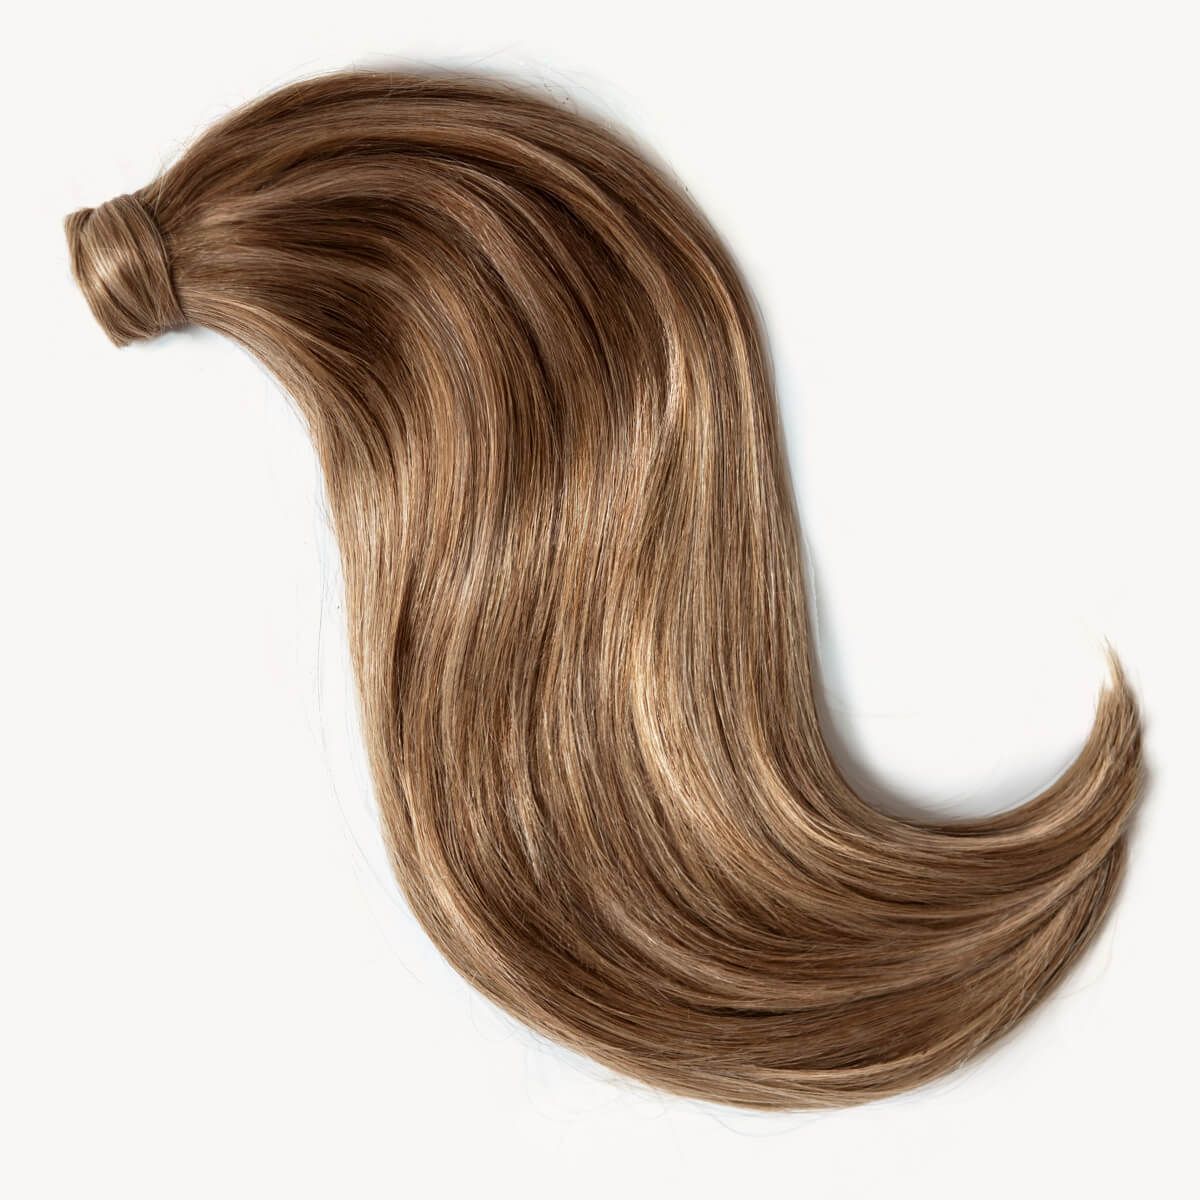 16-INCH CLIP-IN PONYTAIL KERATIN EXTENSIONS 